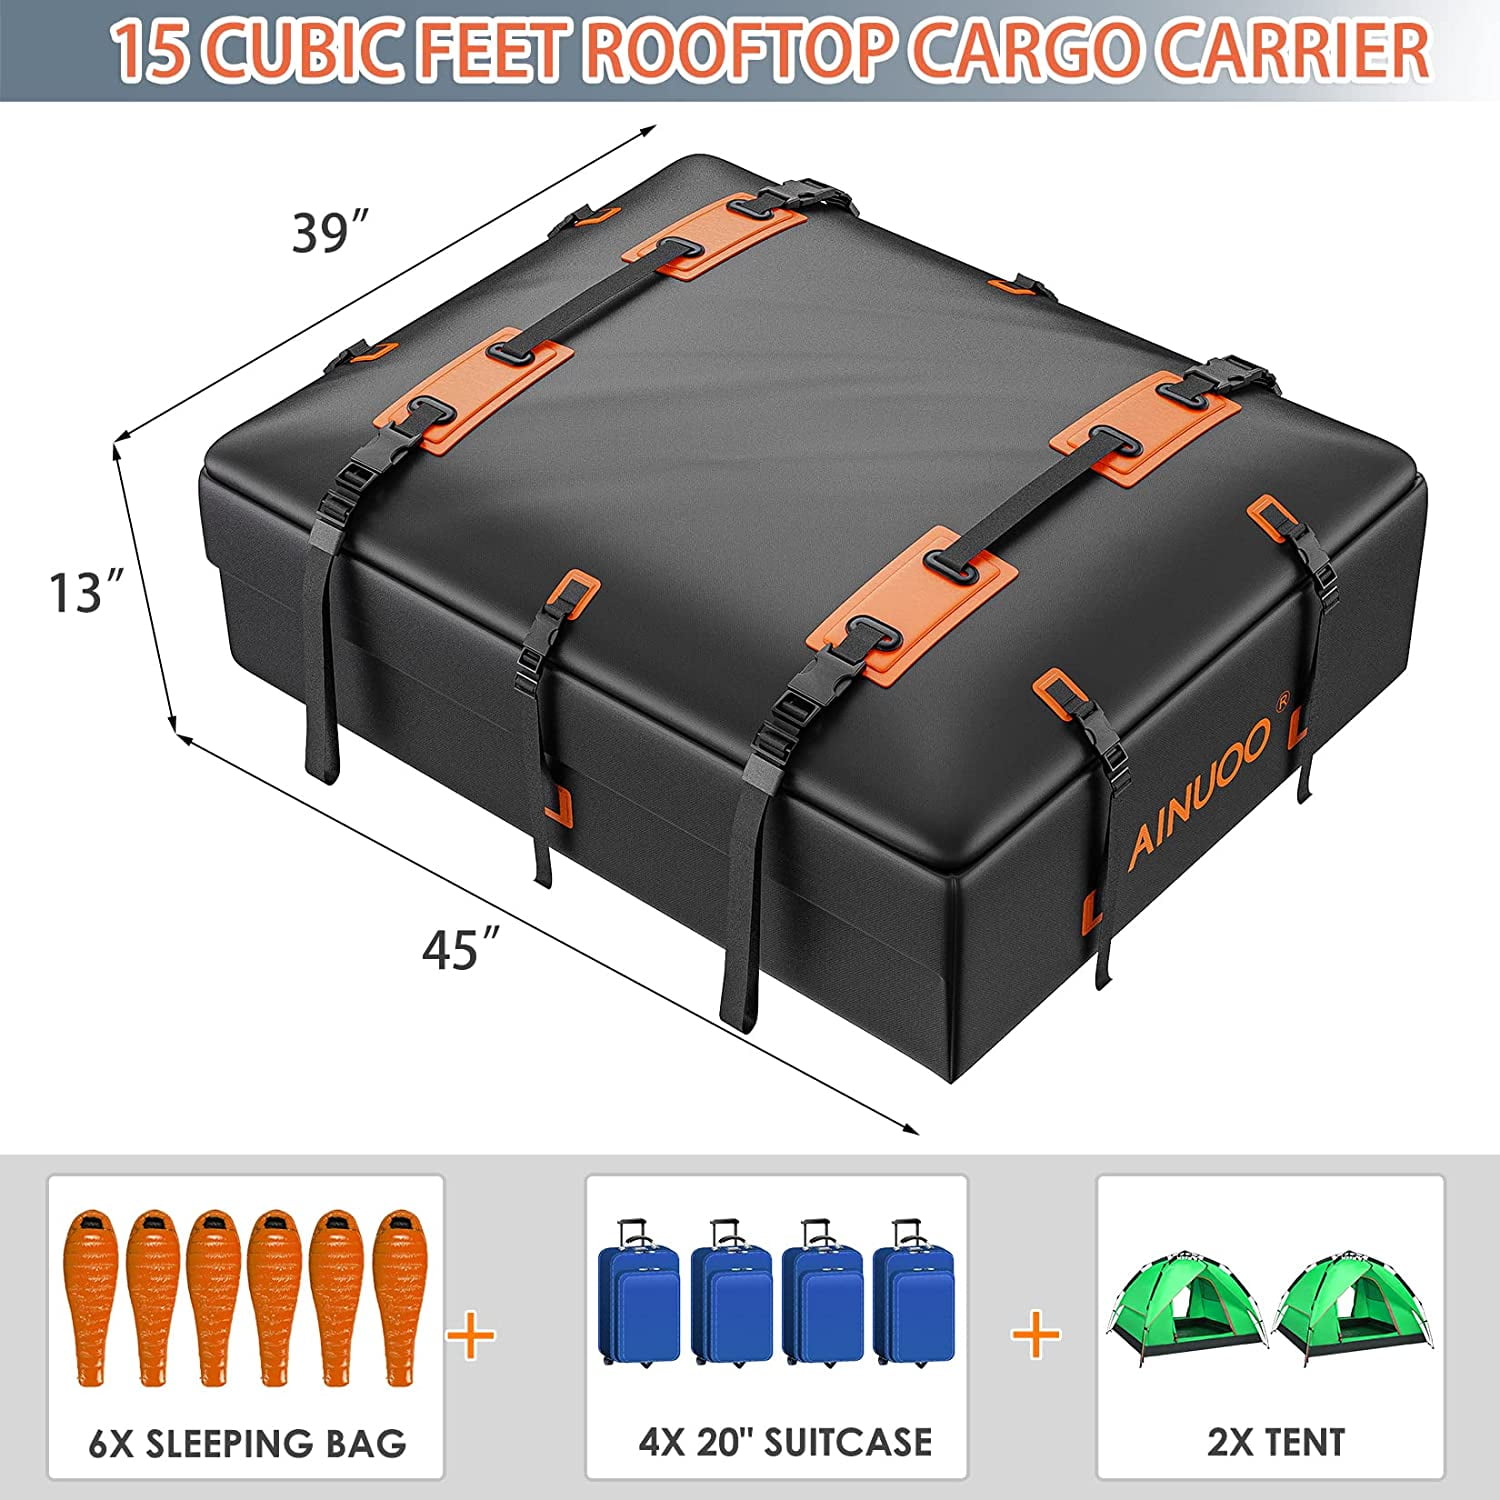 Auto Car Rooftop Cargo Carrier Bag,15 Cubic Car Storage Roof Luggage Travel  Case Bag Waterproof Plus Heavy Duty 840d,Reflective Strips,Anti-Slip Mat,Storage  Bag - China Work Backpack and Outdoor Hiking Backpack price